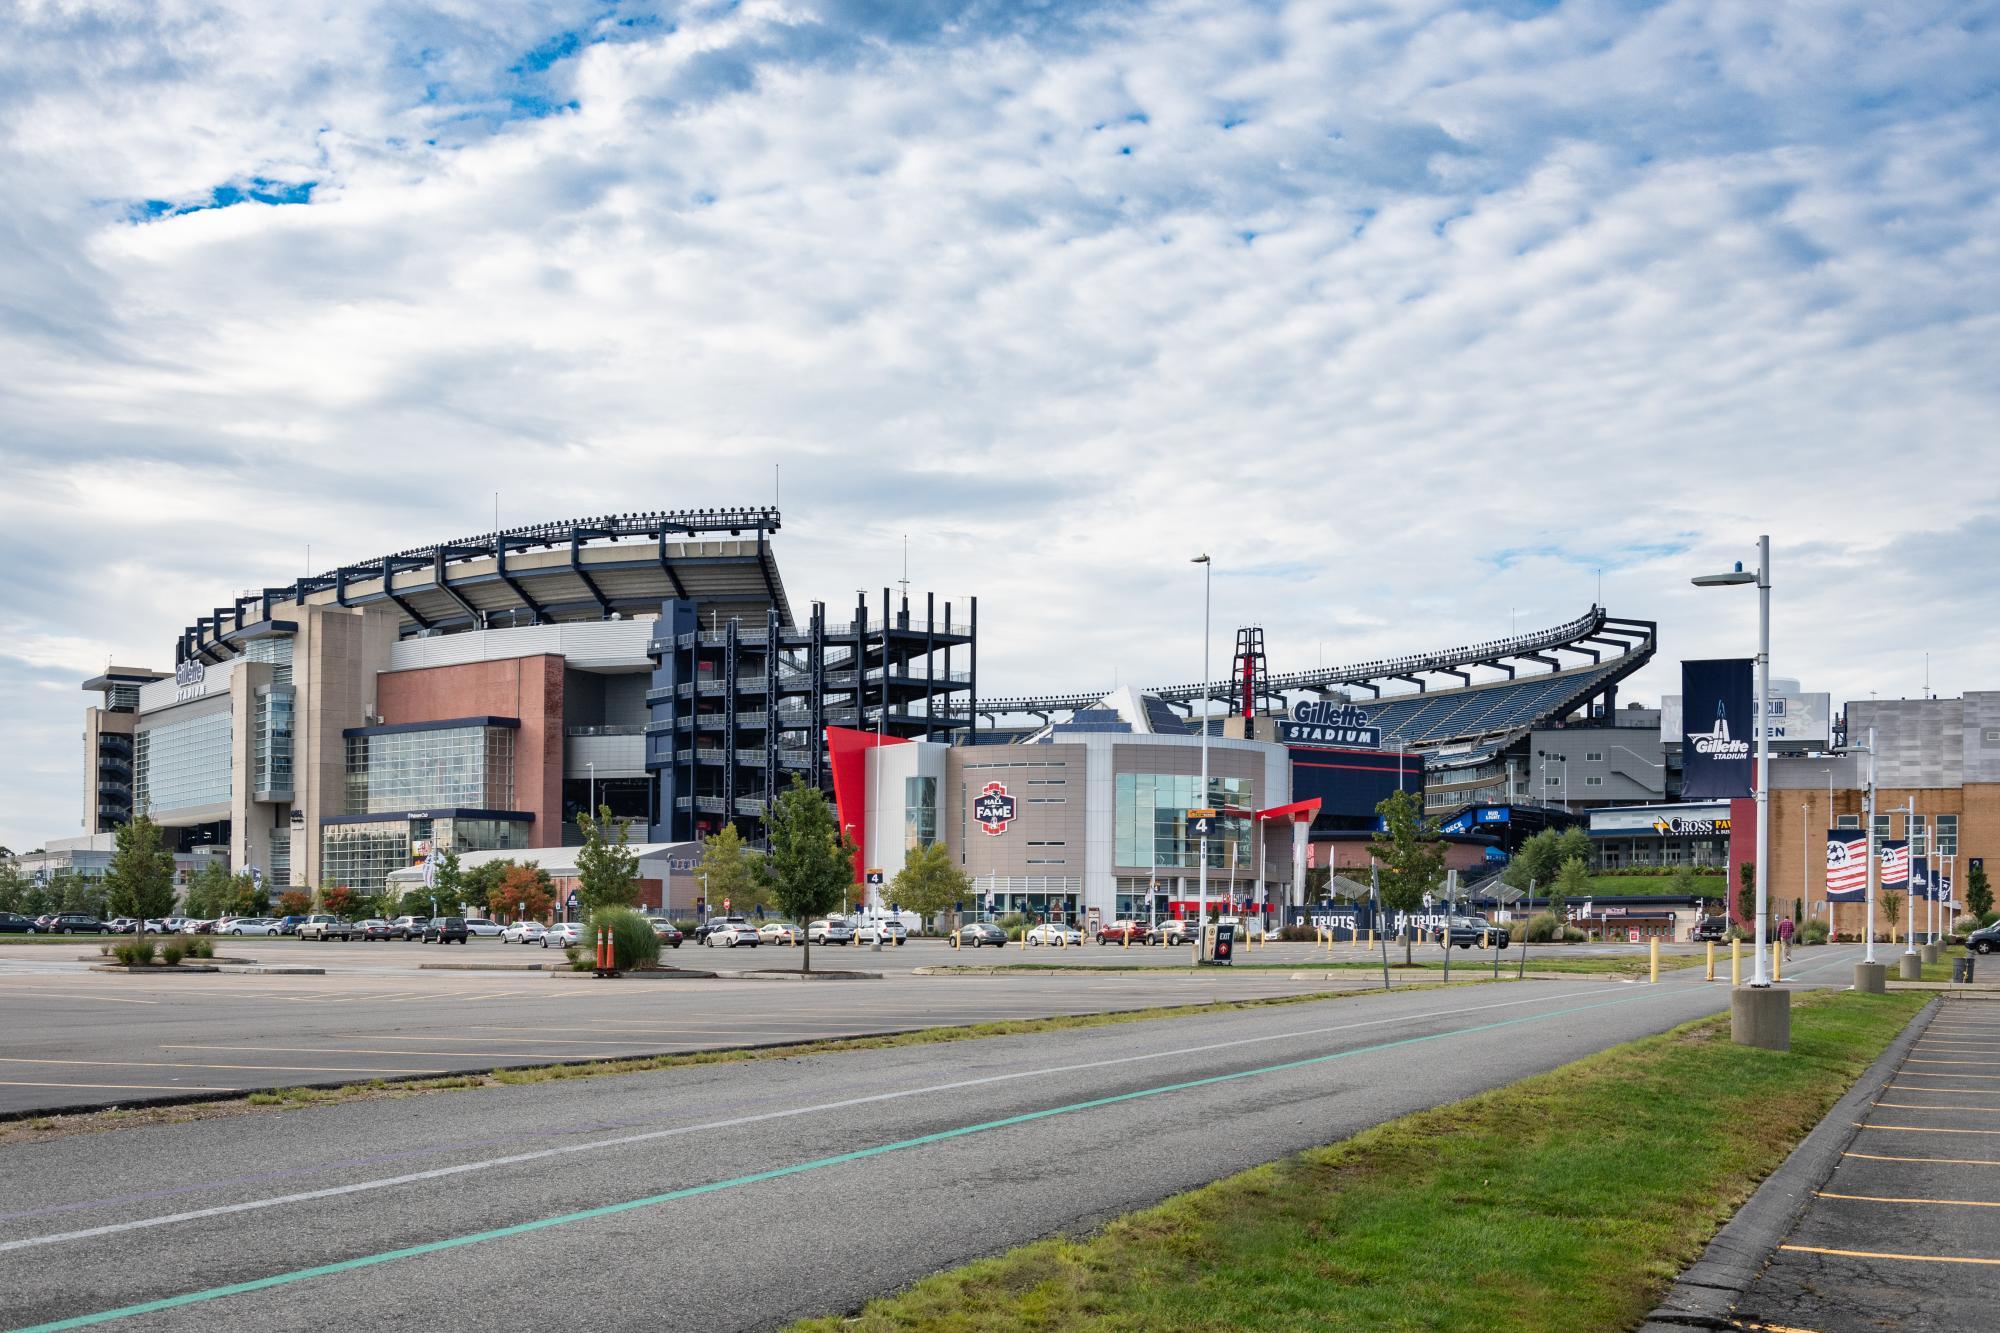 Gillette Stadium viewed from the outside